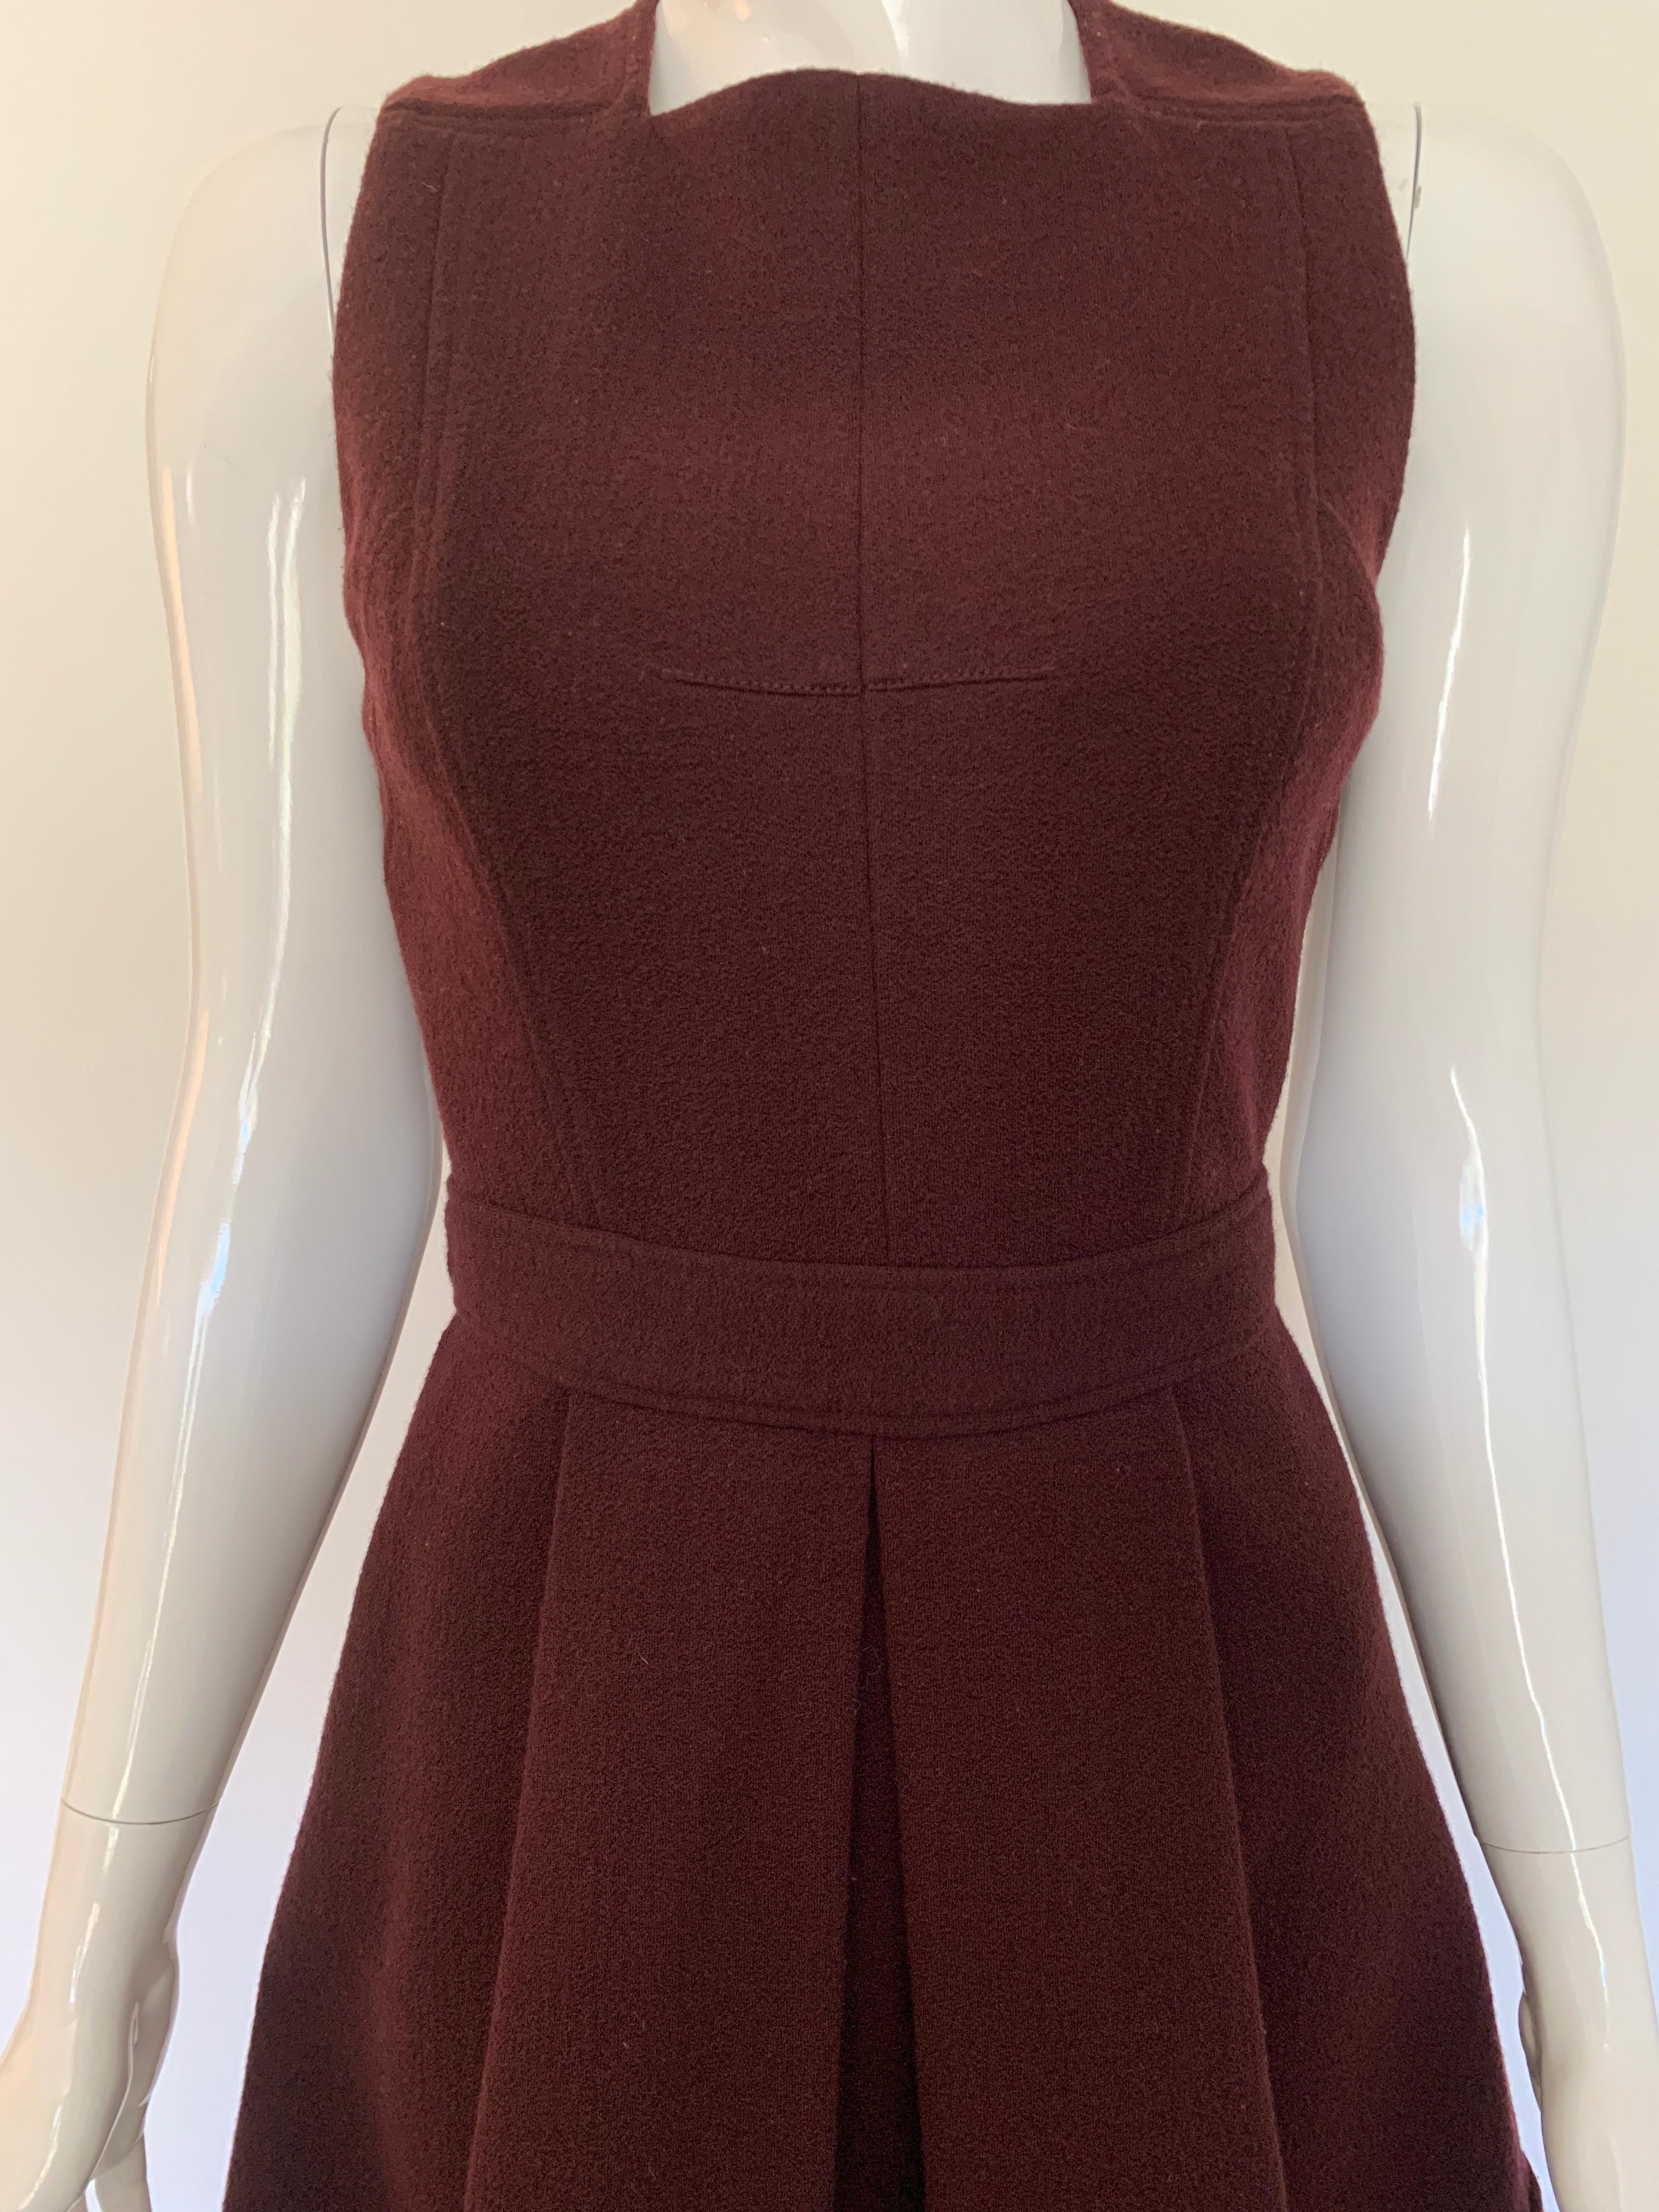 Proenza Shouler Aubergine Dress. 
Classic in style, with a fitted waist and flared skirt. Sleeveless with square neck.

Size 4. 

Great condition, no sign of wear.  